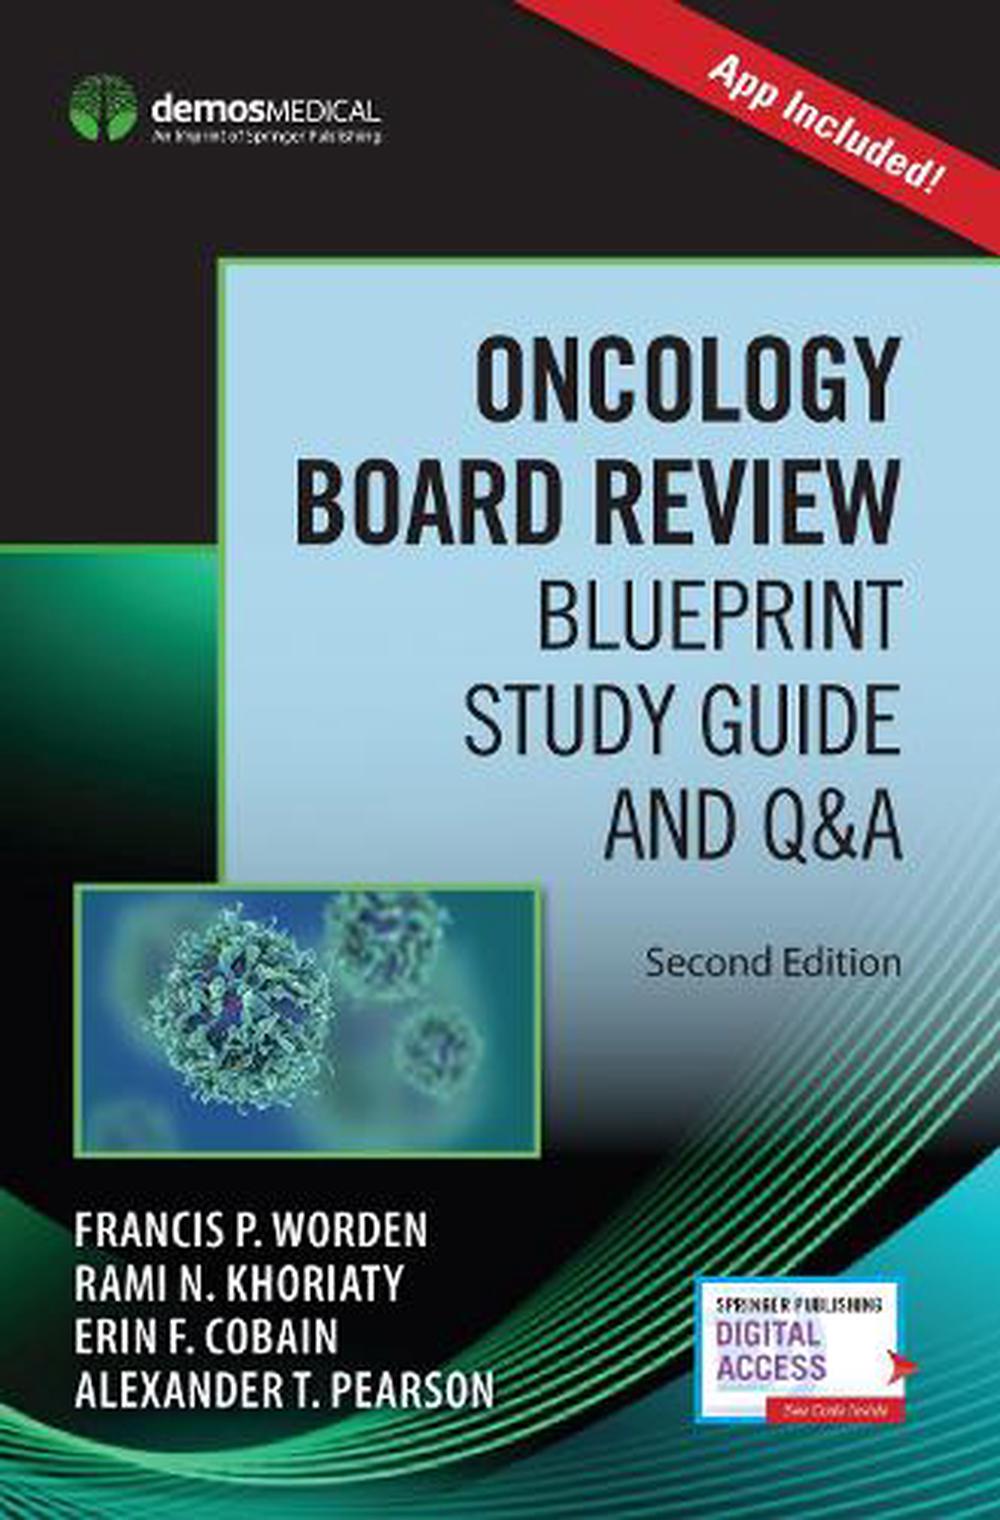 Oncology Board Review Blueprint Study Guide and Q&A by Francis P